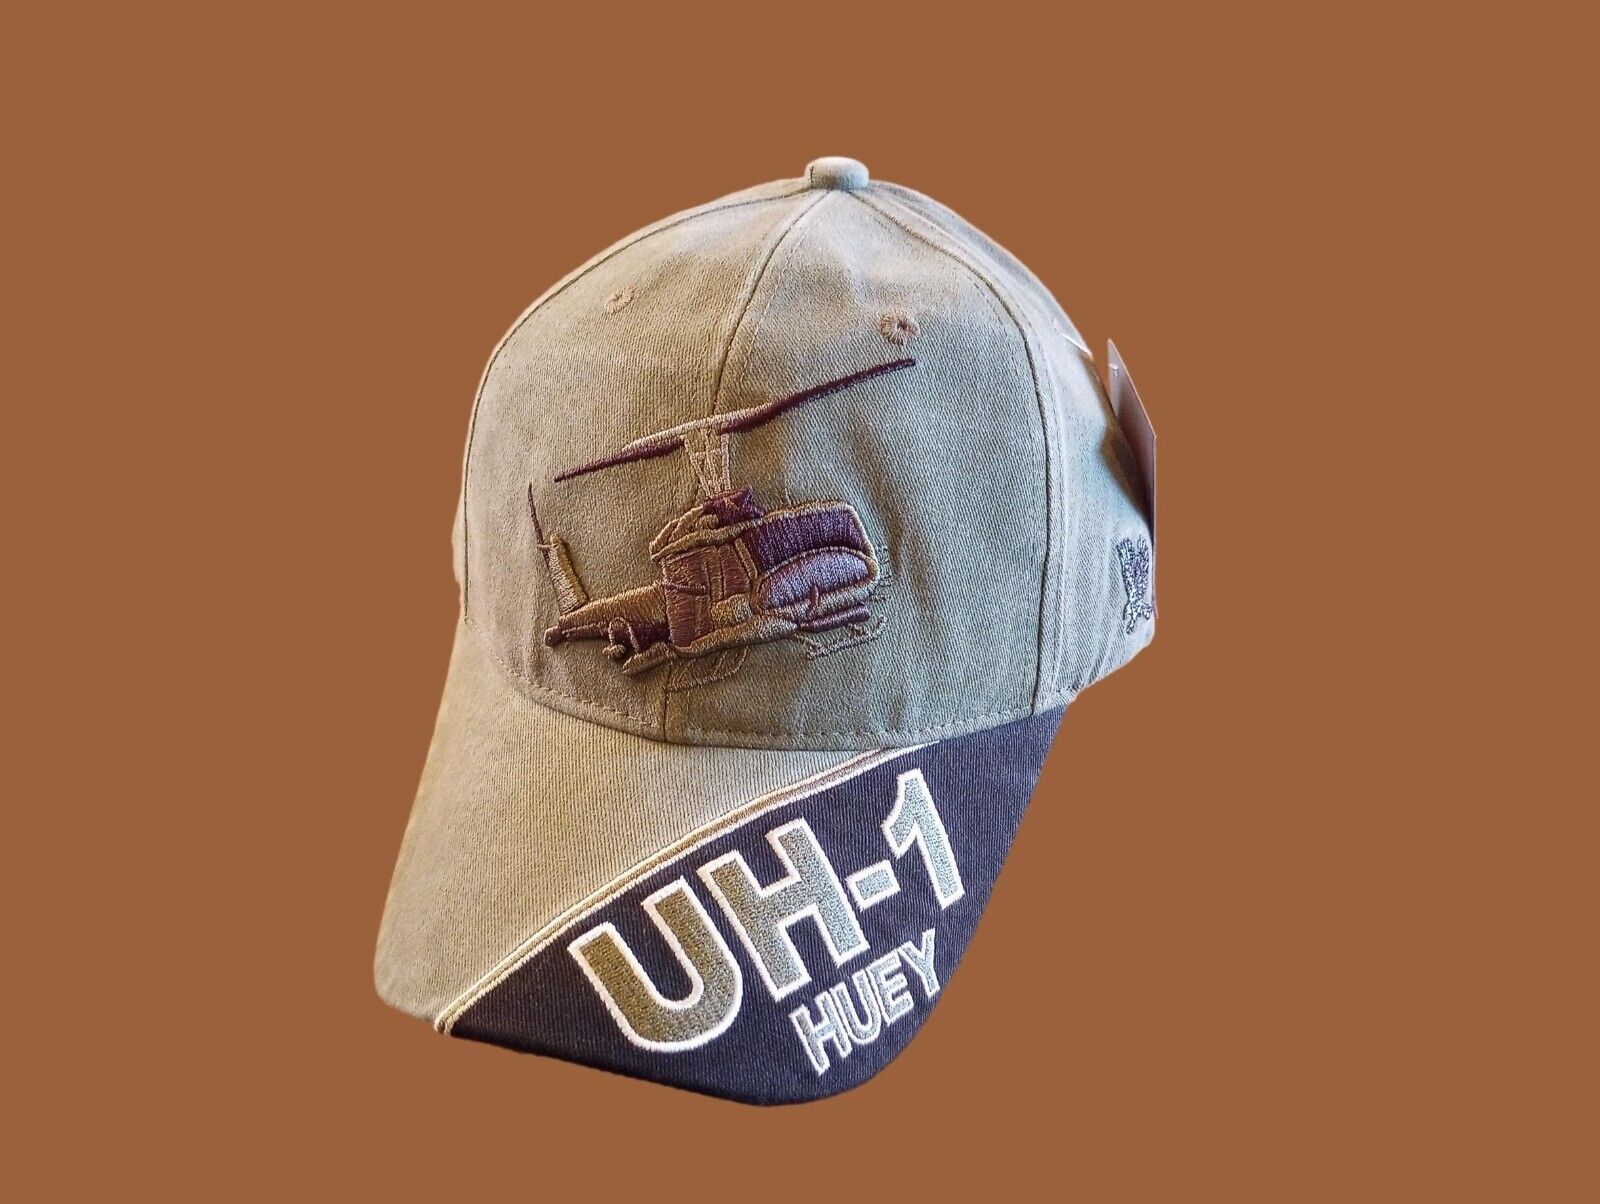 U.S ARMY UH-1 HUEY HAT EMBROIDERED MILITARY BALL CAP STONE WASHED OD GREEN